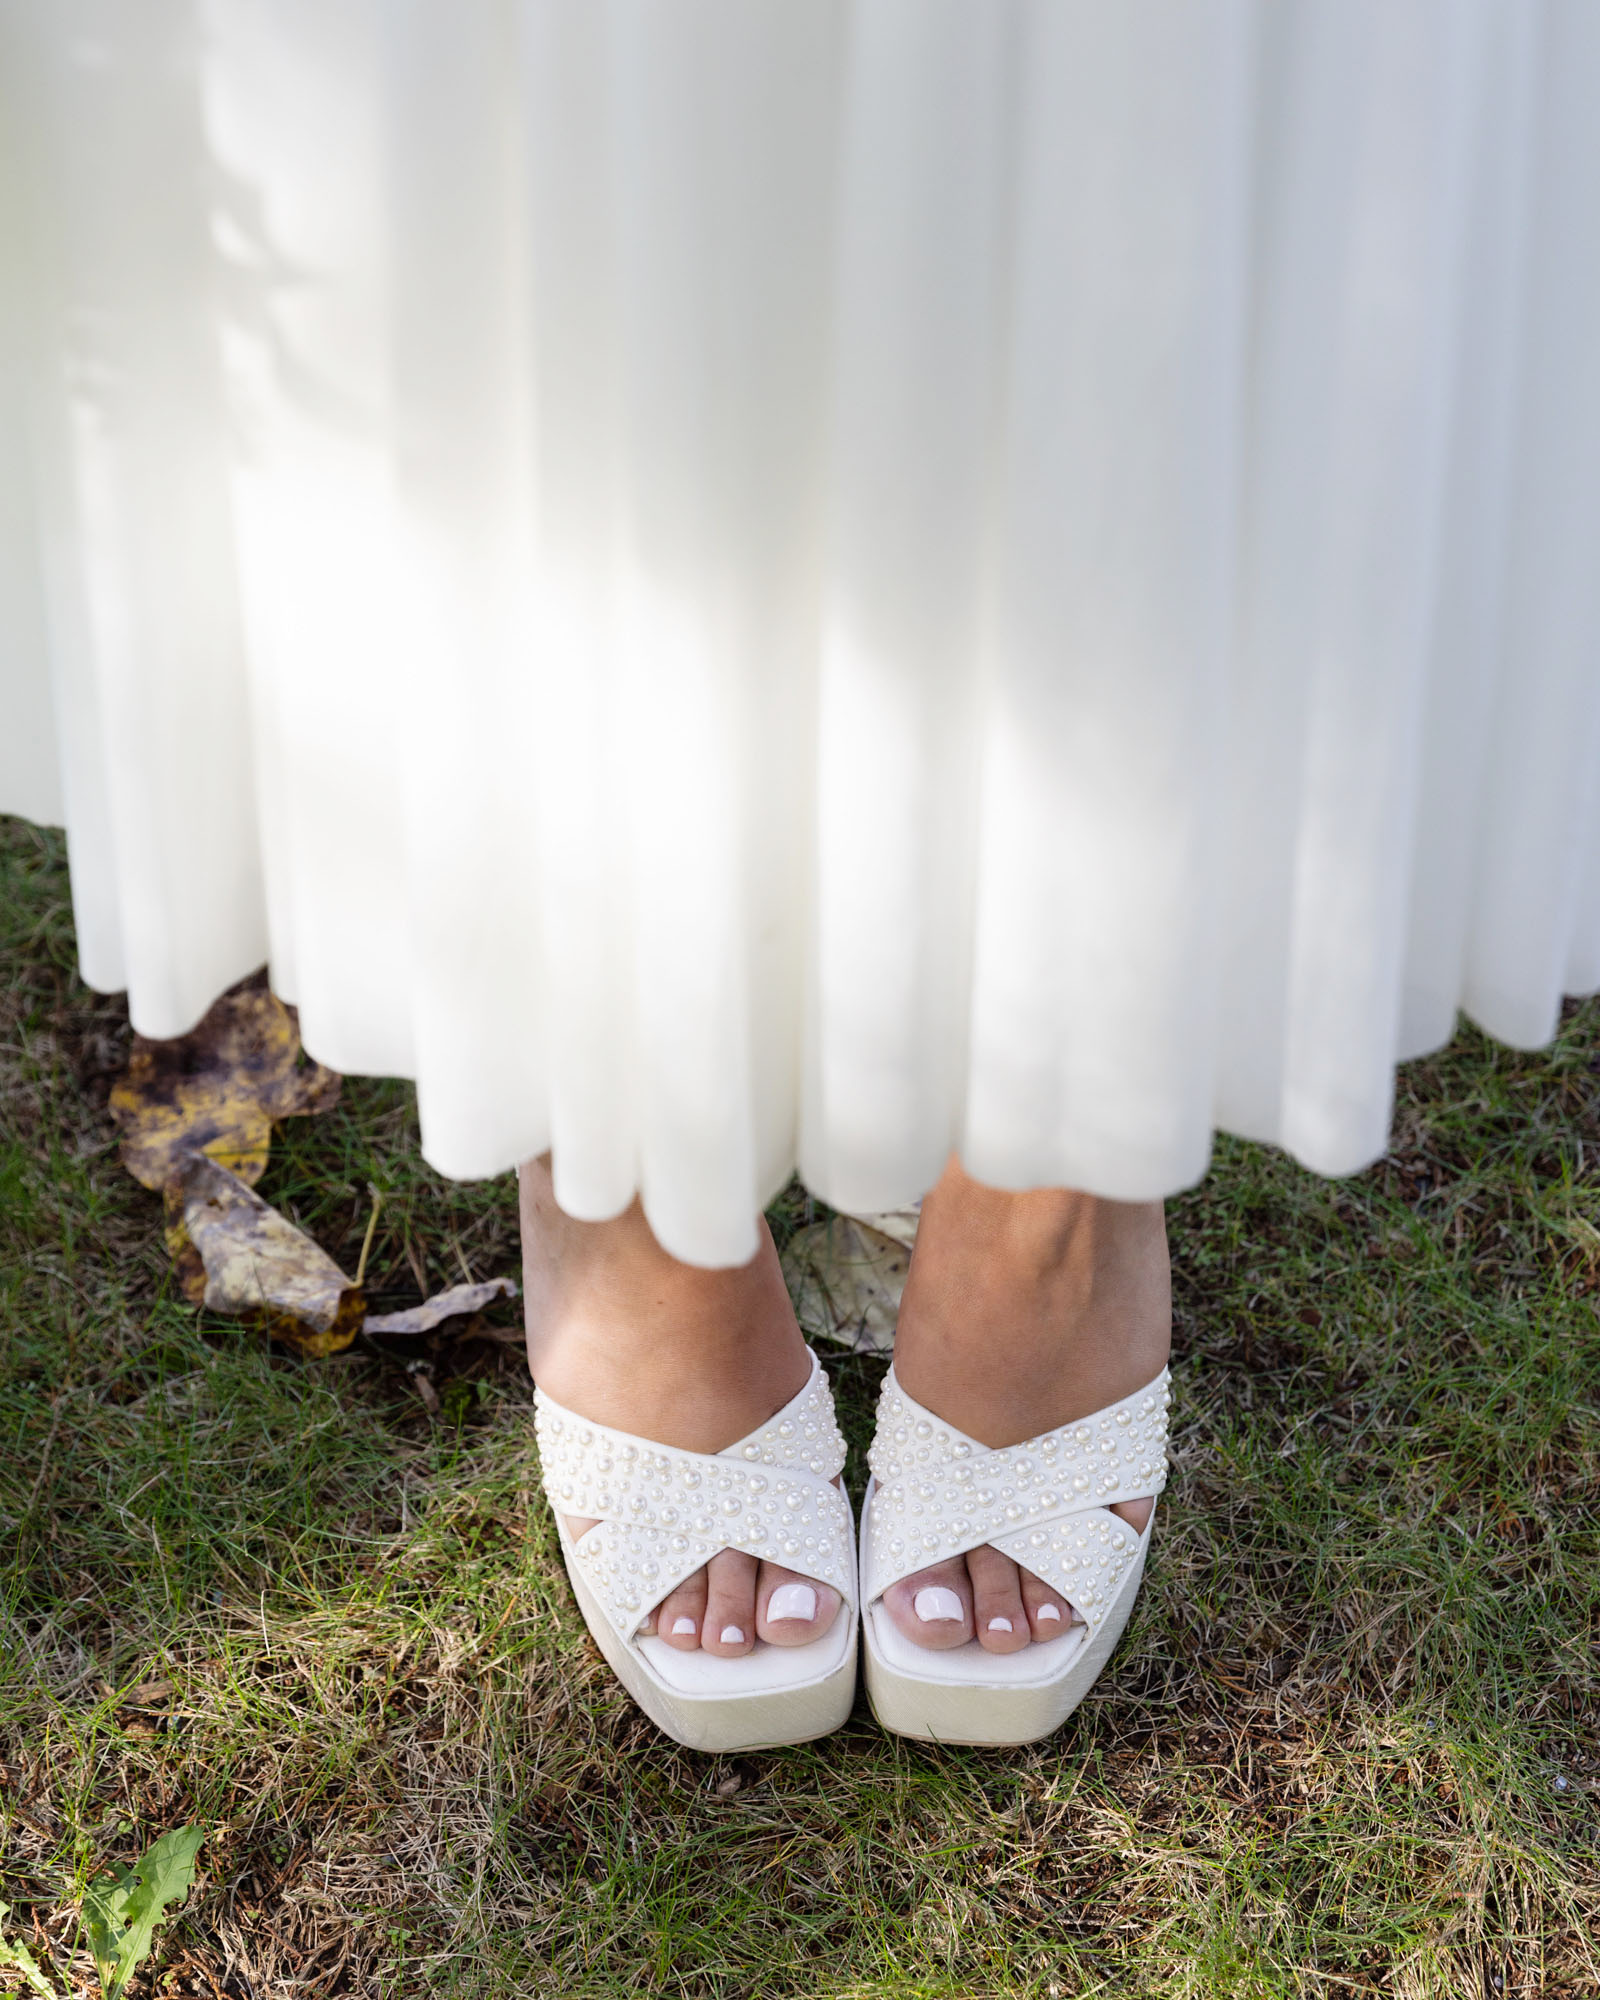 Detail of bride's white, pearl-studded platform sandals at a wedding ceremony at Bowman's Hill Wildflower Preserve in New Hope, PA